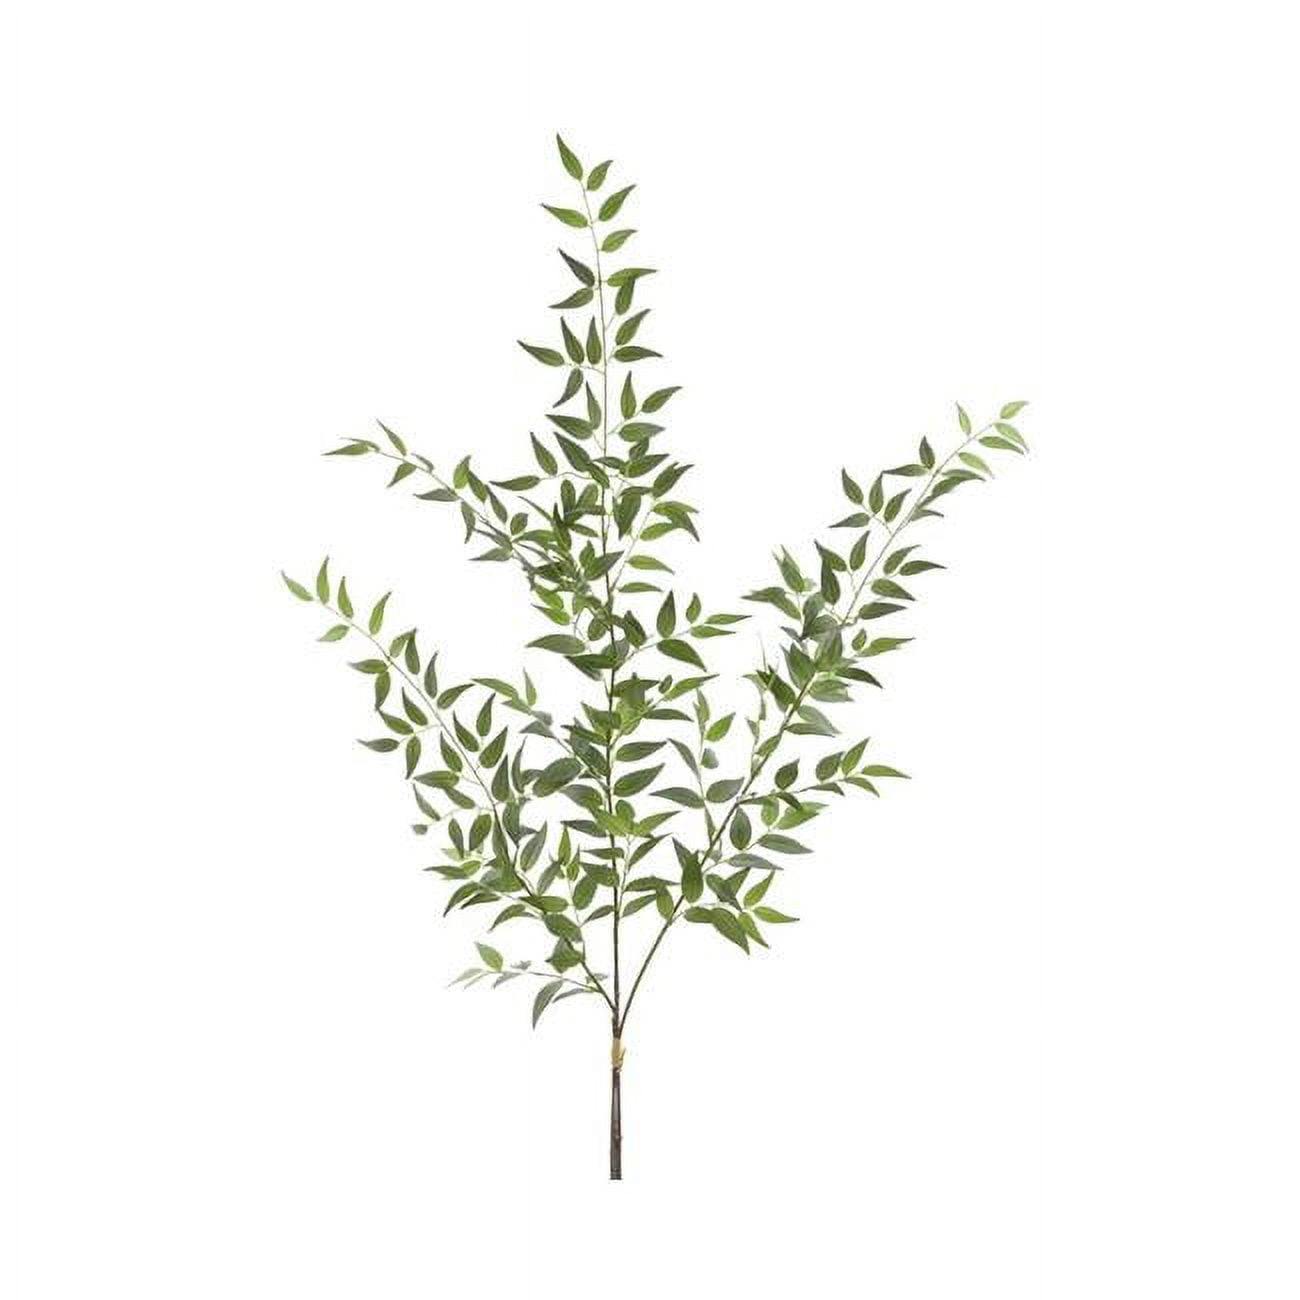 Picture of Allstate Floral & Craft PBR148-GR-GY 49 in. Silk Italian Ruscus Leaf Stem Bundle - Green & Gray